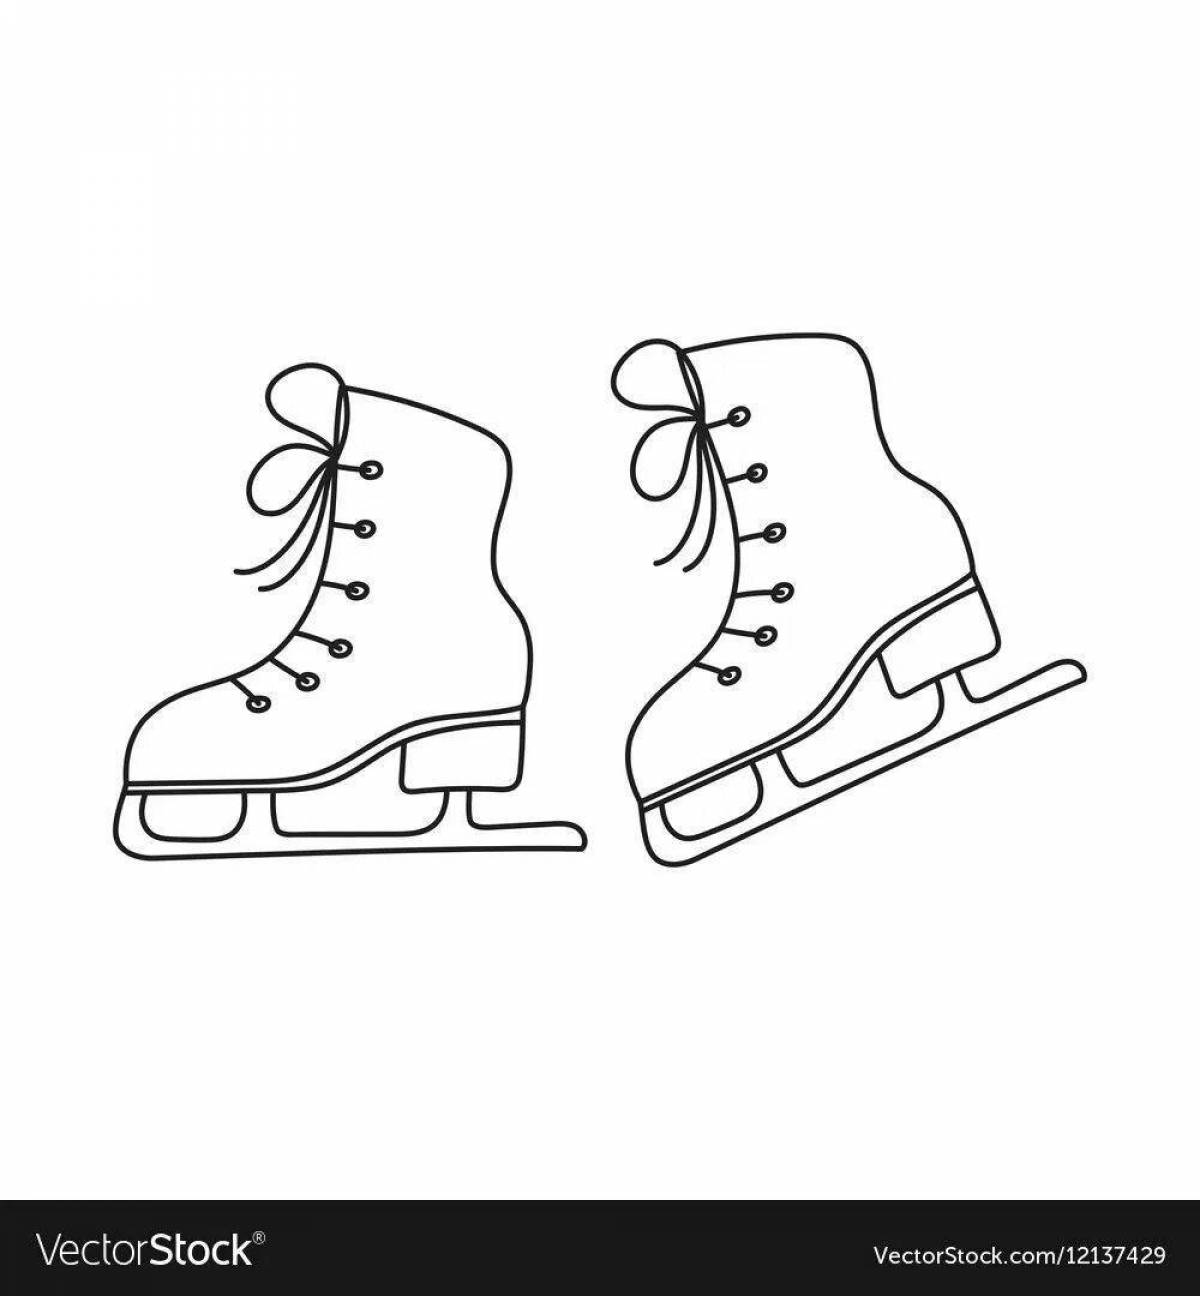 Coloring page with colorful skate pattern